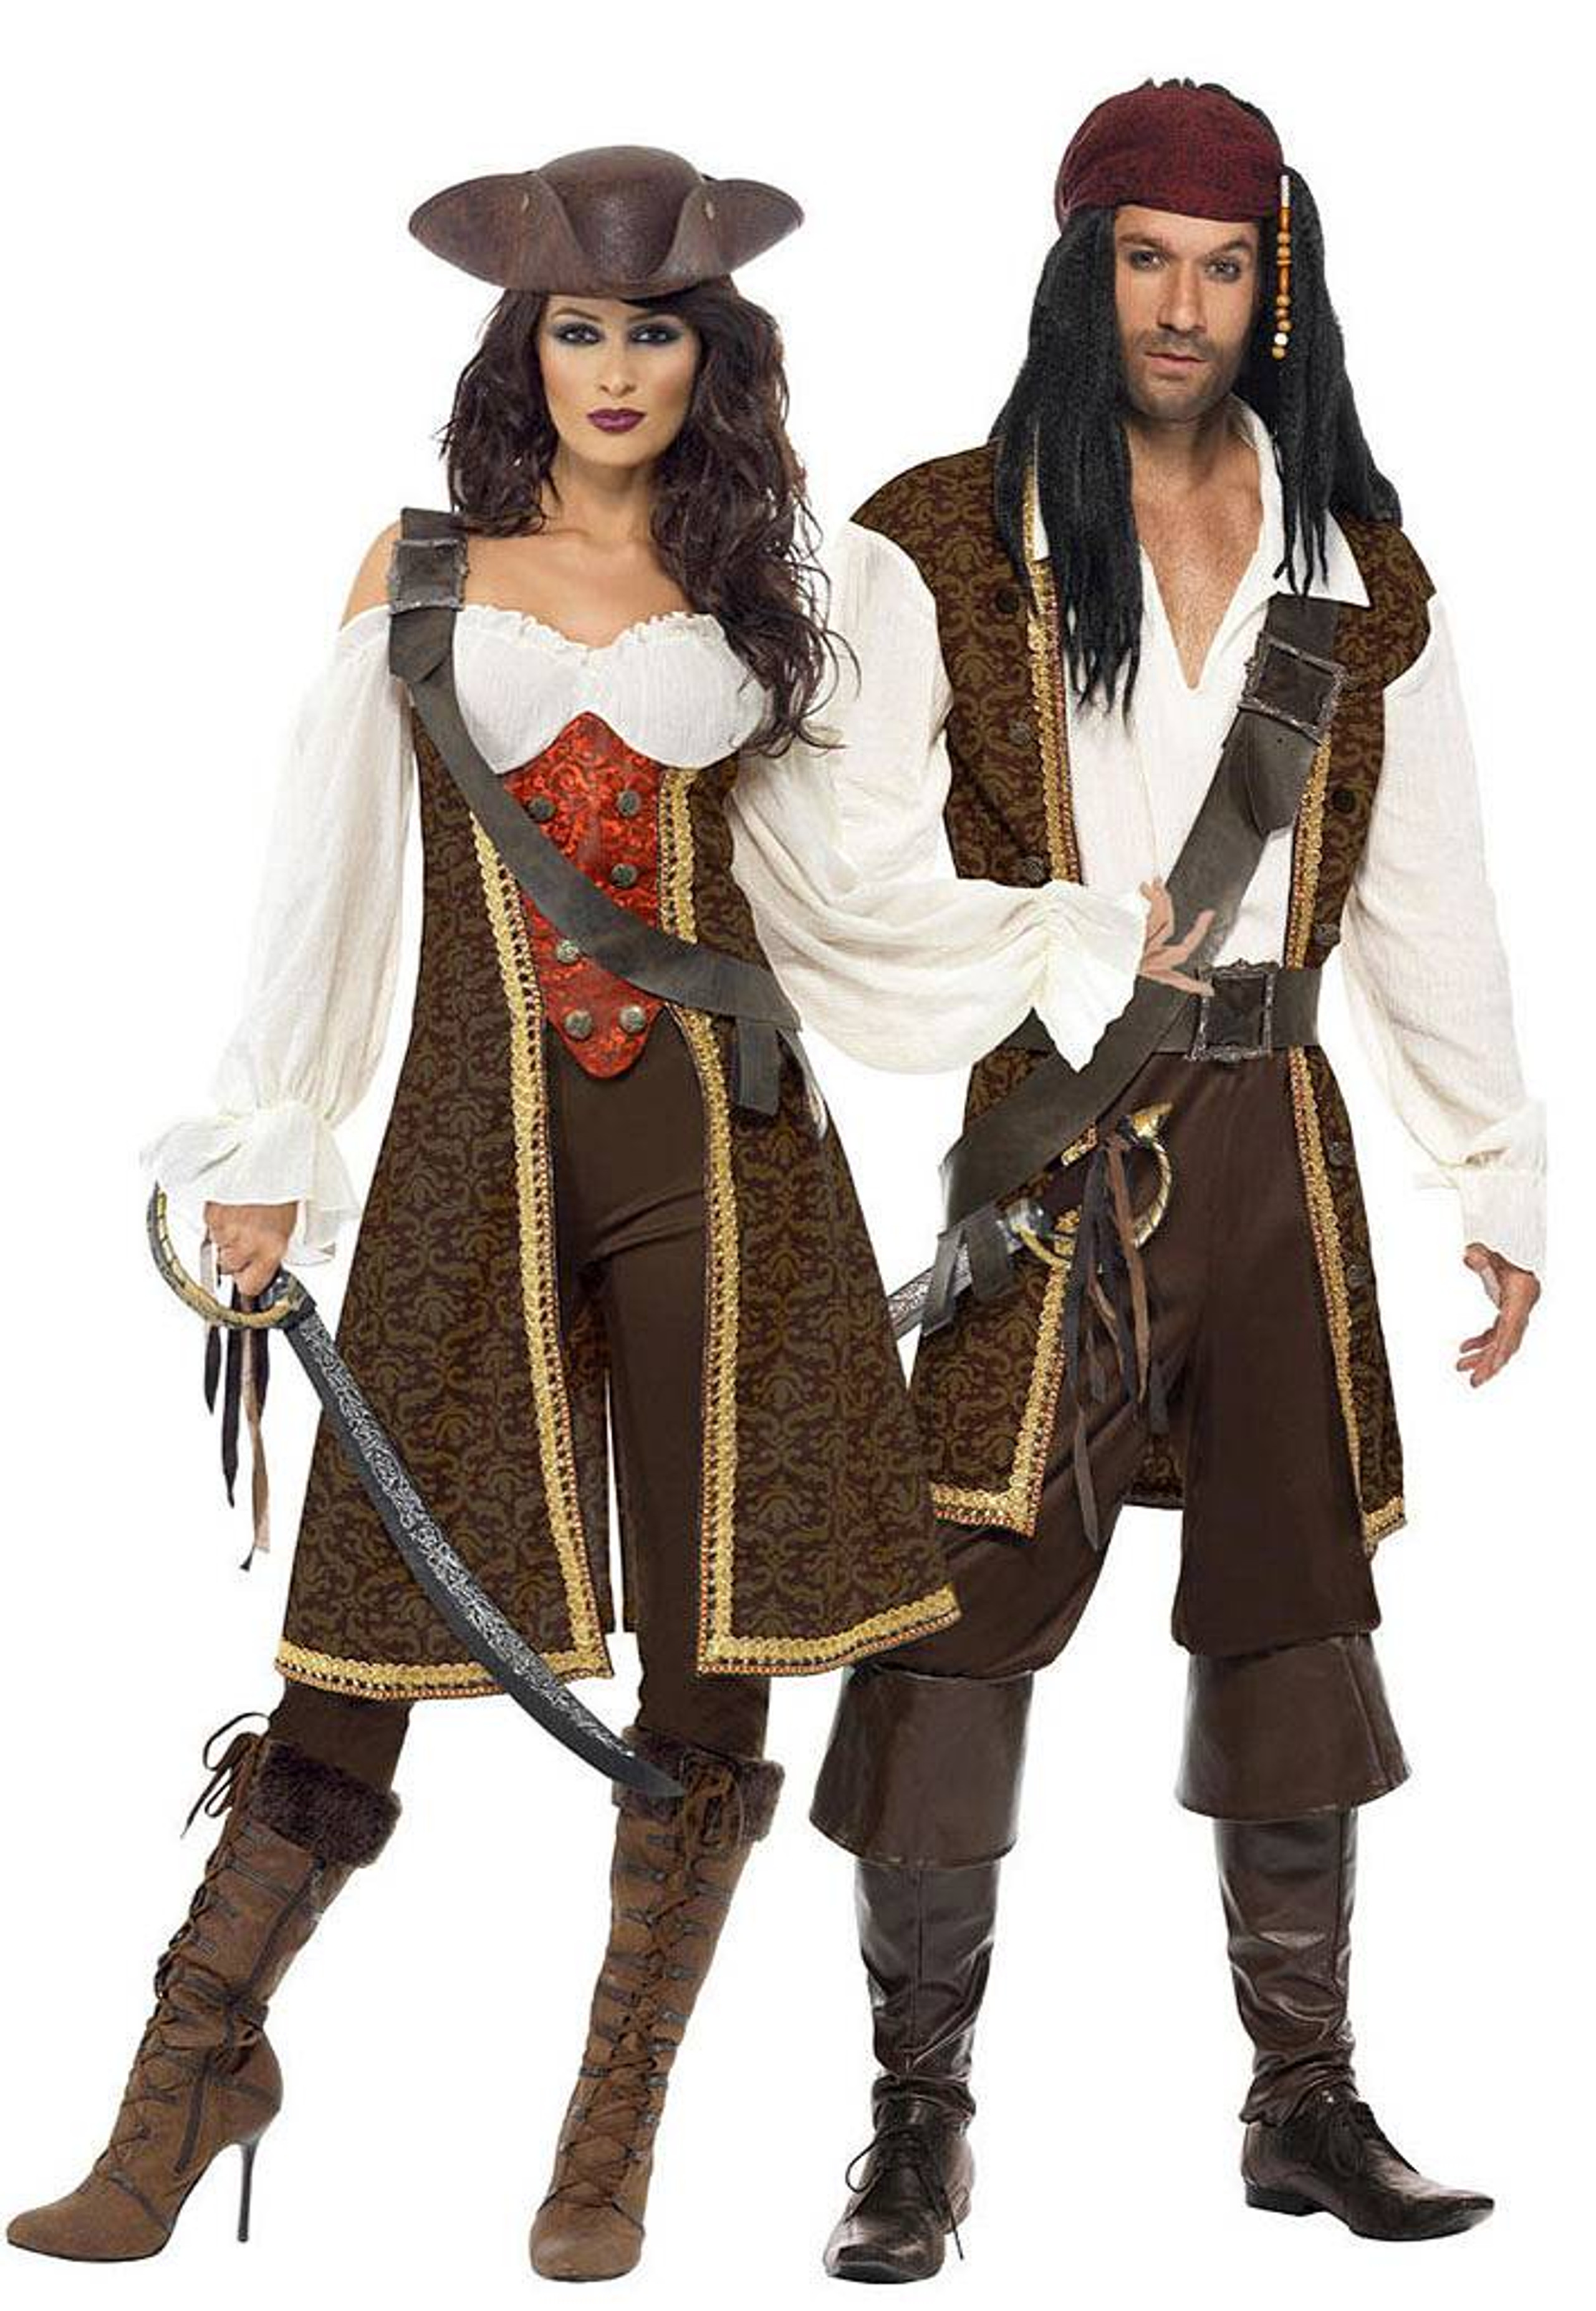 High Seas Pirate Lad and Wench Couple Costume